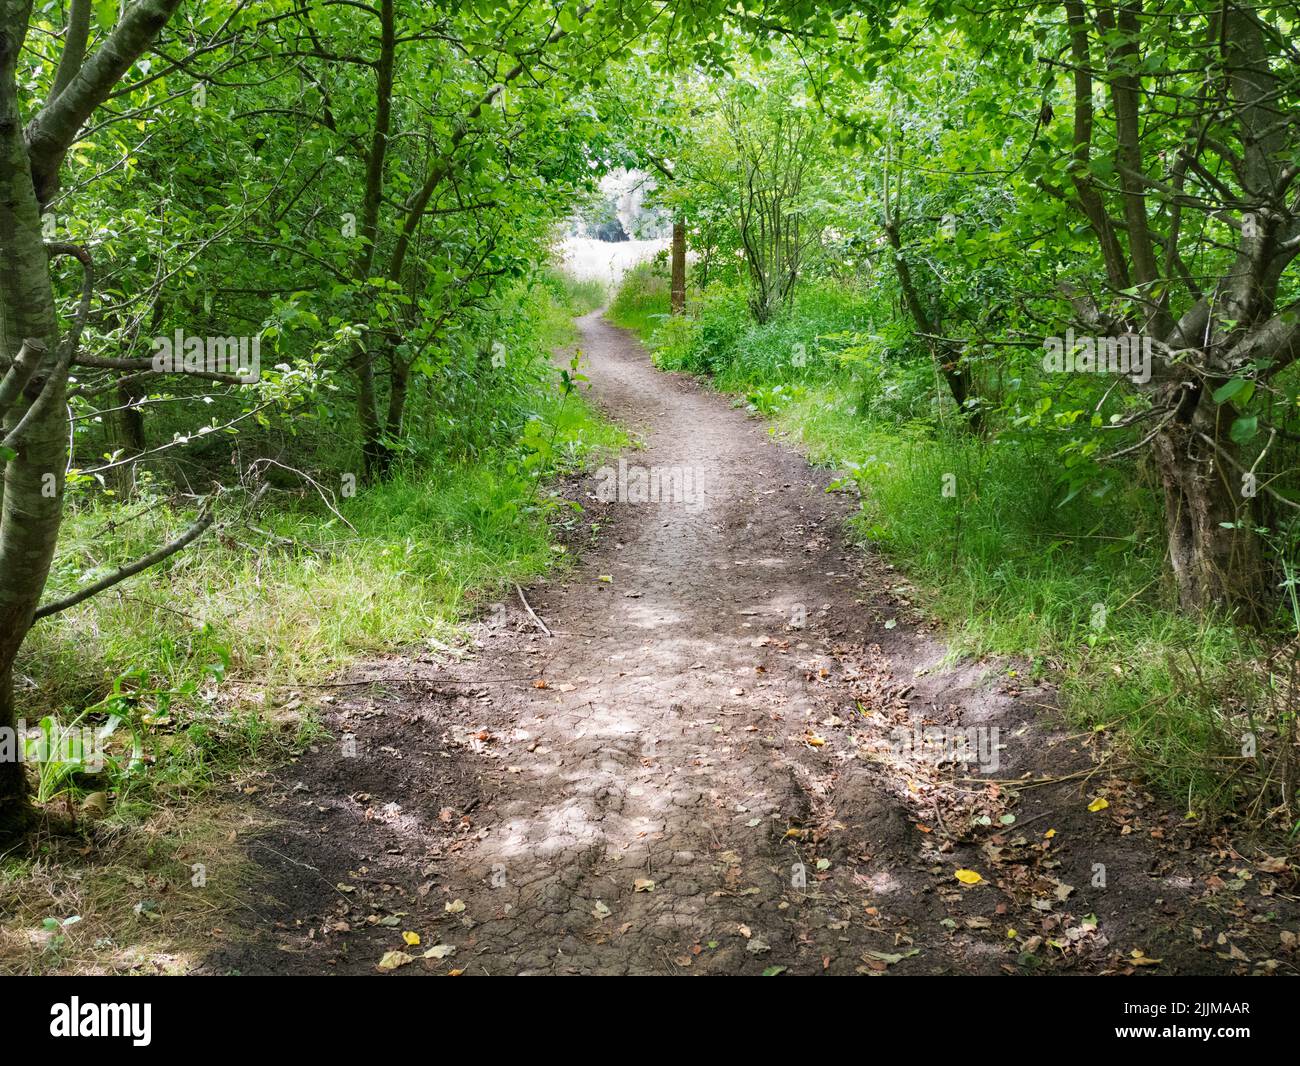 This delightful footpath leads from lower Radley Village to the River Thames as it wends its way through rural Oxfordshire. Stock Photo